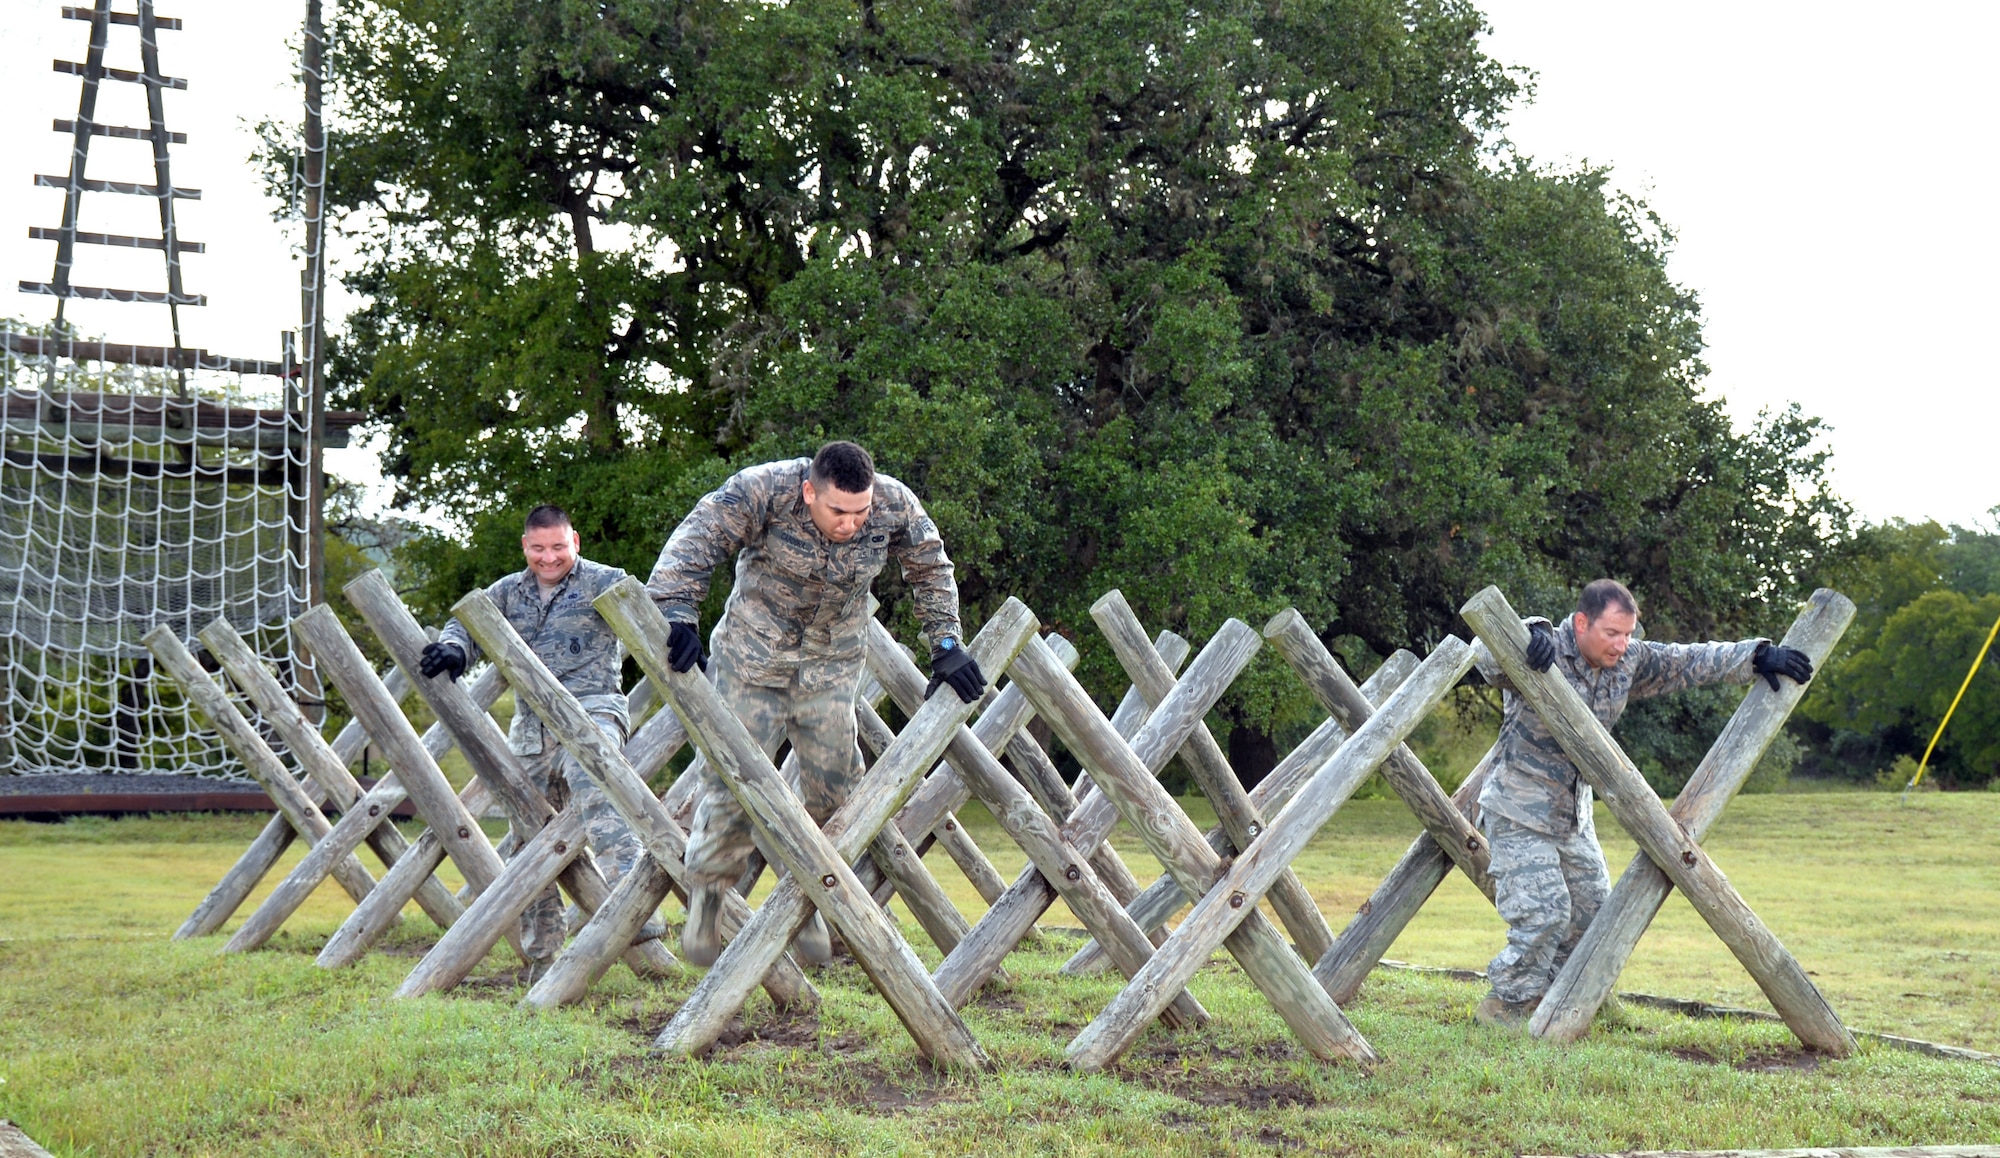 Air Force Reserve Command Defender Challenge Team Members Tech. Sgt. Mariano Flores, Senior Airman Rick Cardona, and Tech Sgt. Francisco Gonzalez, navigate the “Tough Nut” obstacle at the Camp Bullis Military Training Reservation, Texas, Sept. 6, 2018.